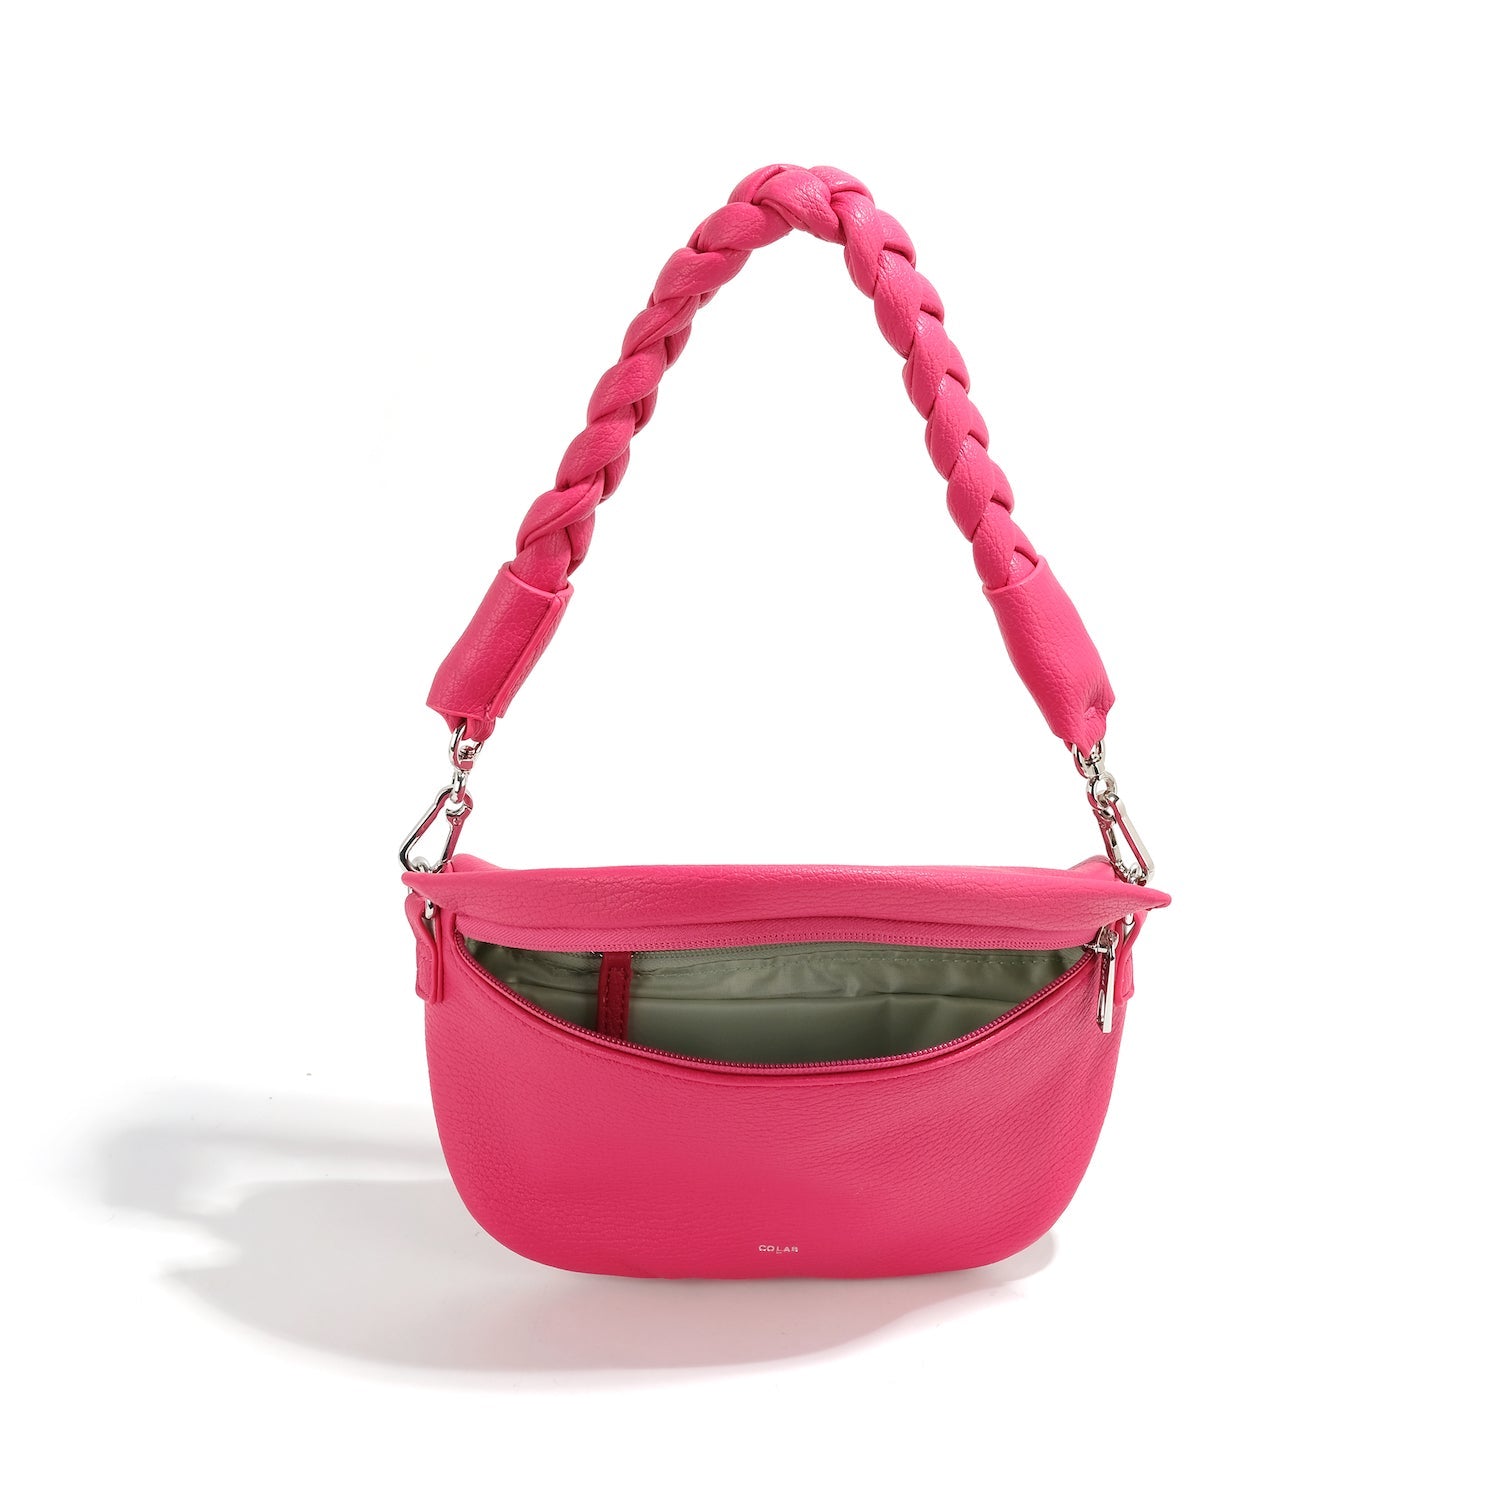 co-lab Kenny Sling Bag - Beetroot Accessories - Other Accessories - Handbags & Wallets by co-lab | Grace the Boutique